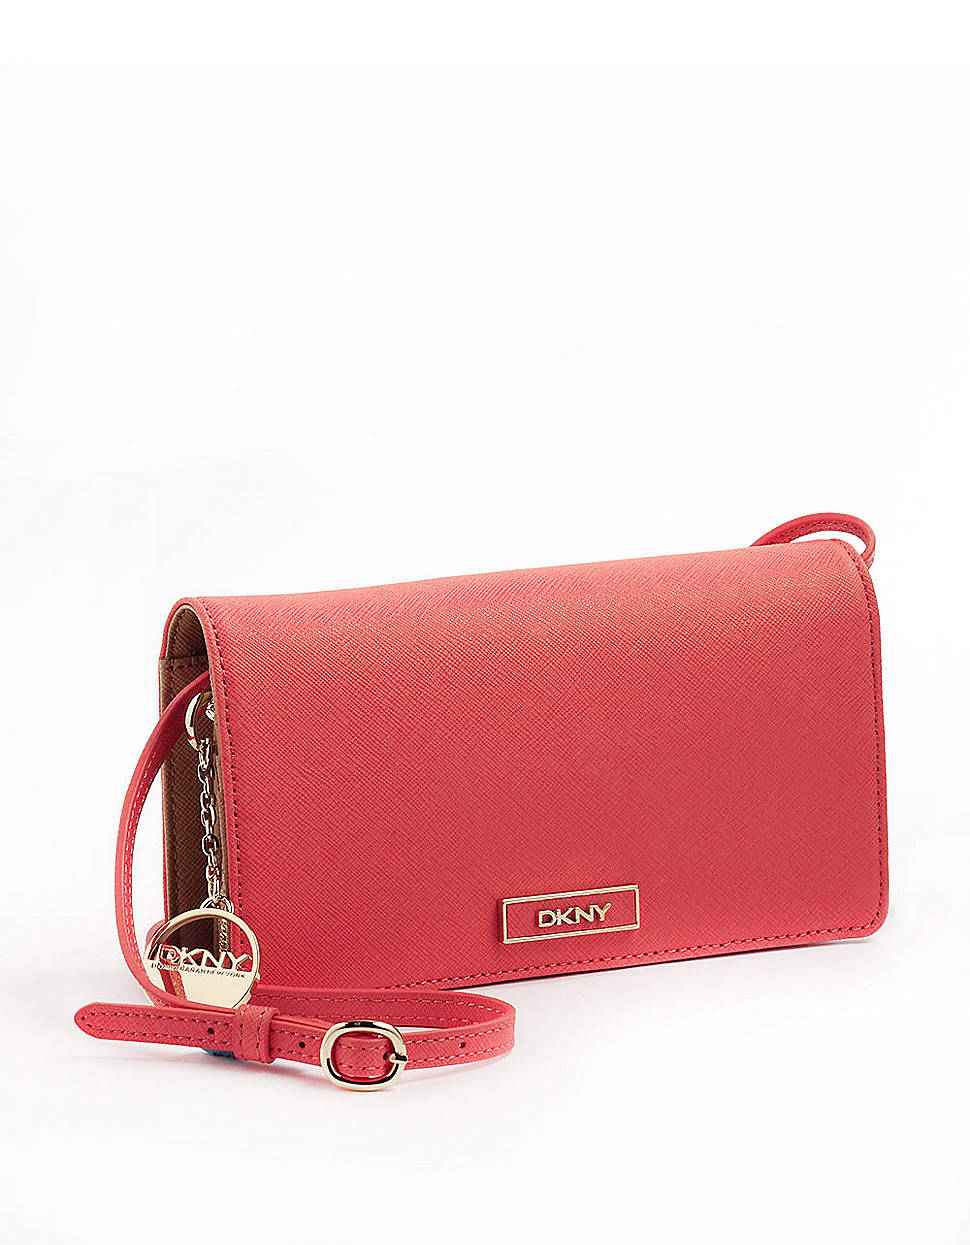 Dkny Saffiano Leather Convertible Crossbody Clutch Bag in Pink (CORAL ...